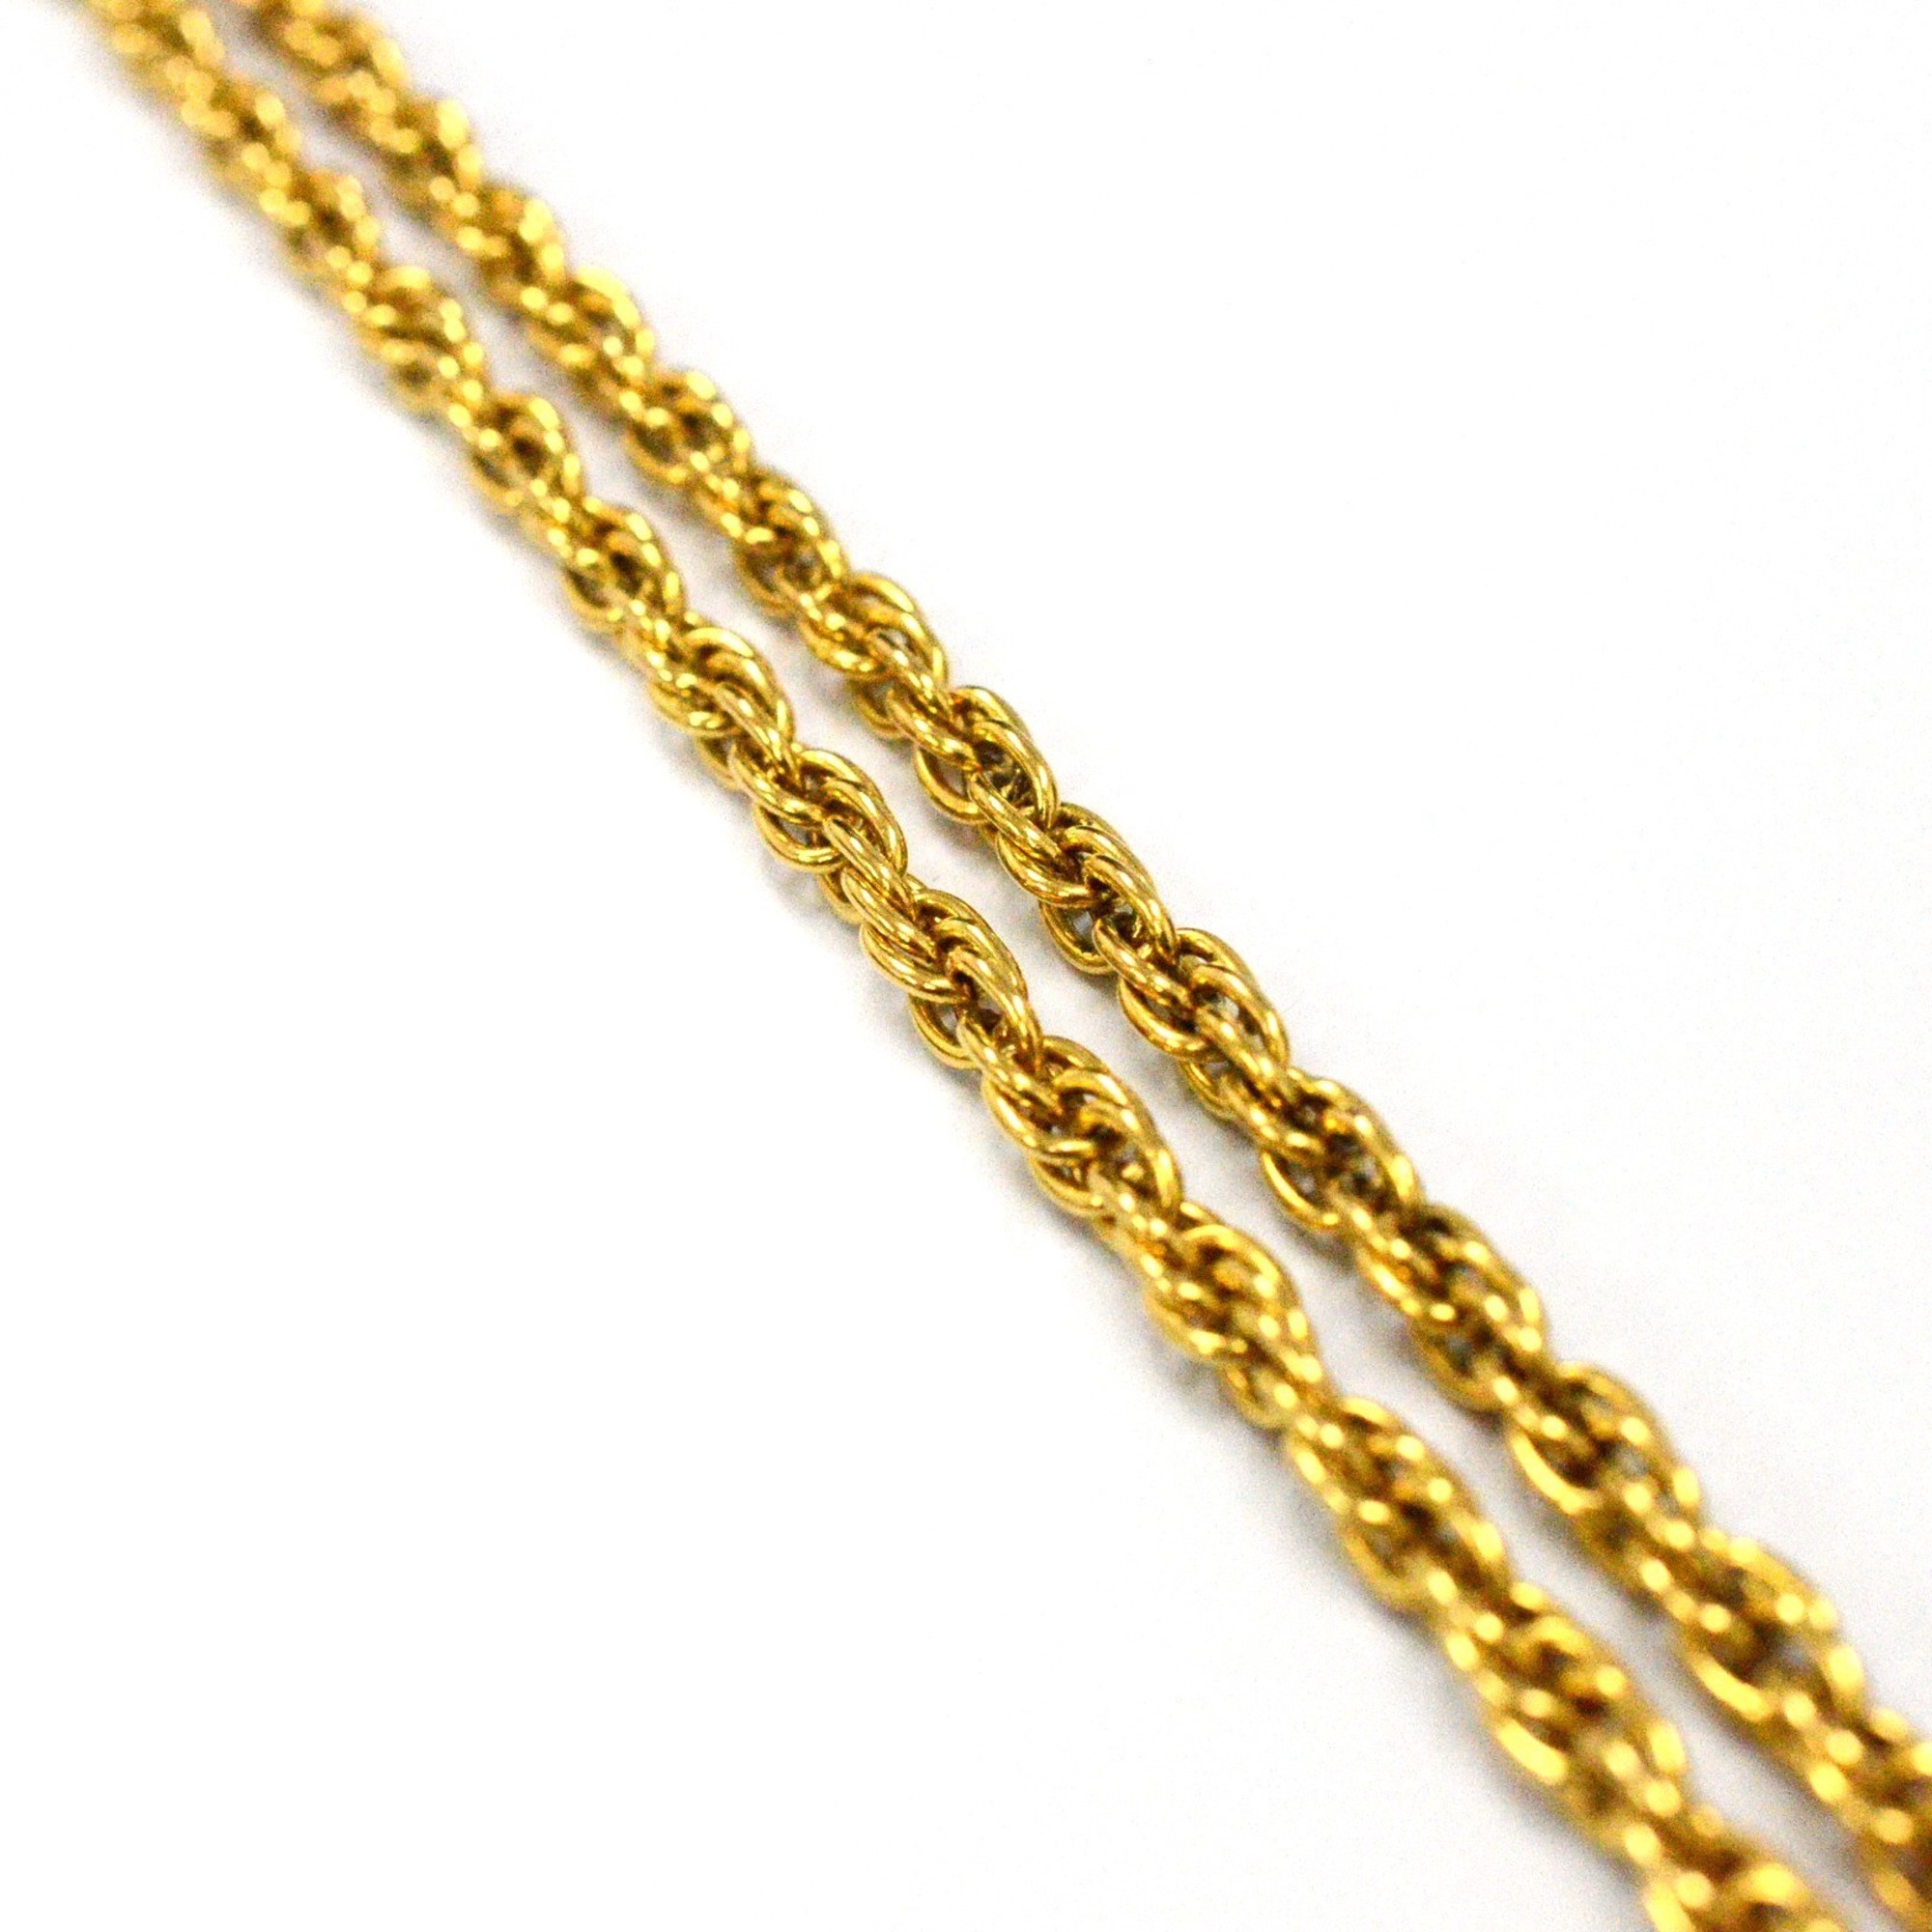 CHANEL Long Necklace 1985 Coco Mark Old Gold Plated JA-19097